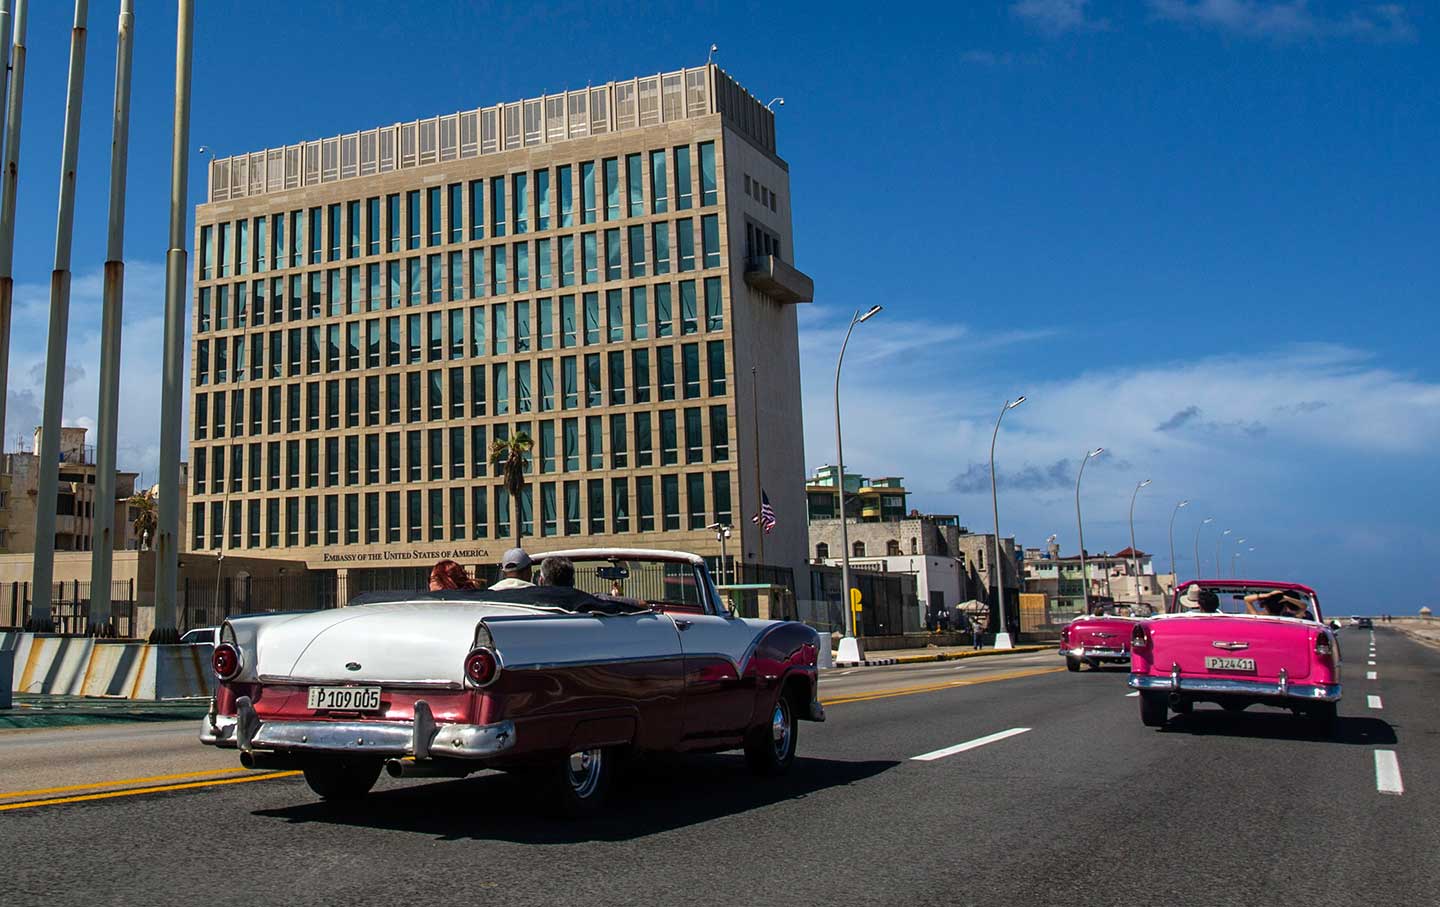 Pesticides Likely Caused ‘Havana Syndrome’ That Affected Cuba-Based Diplomats